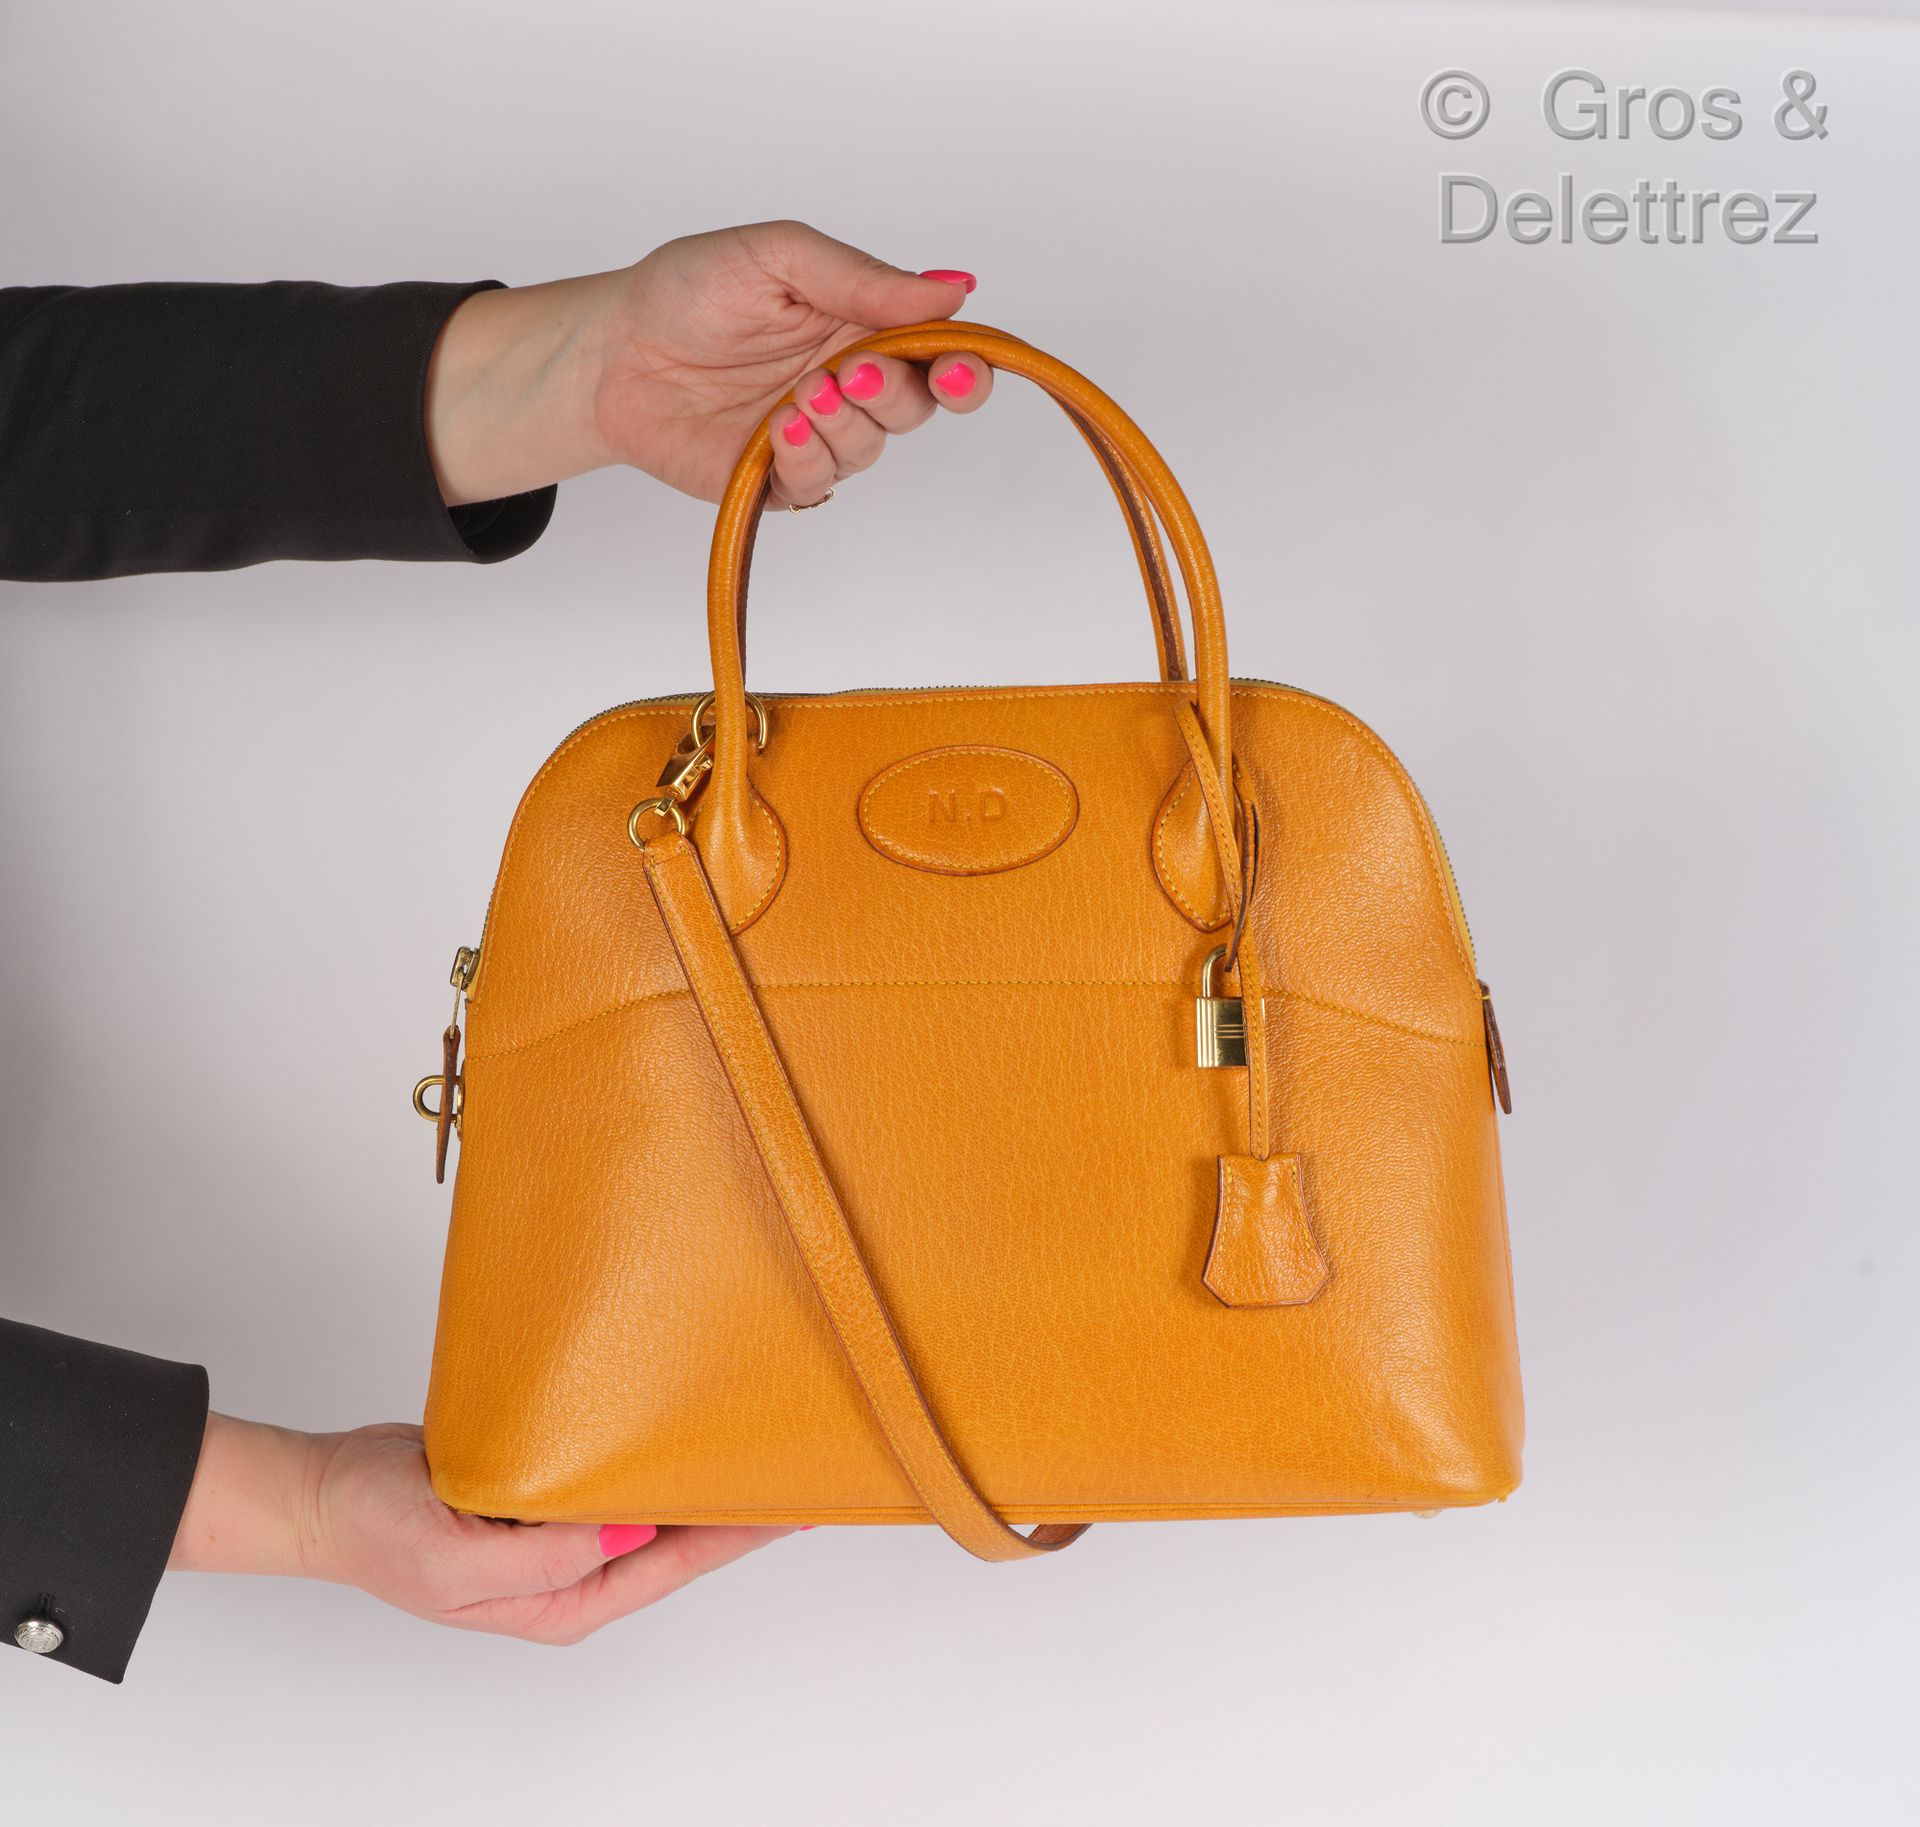 HERMÈS Paris made in France Bag "Bolide" 31cm in grained sunshine yellow leather&hellip;